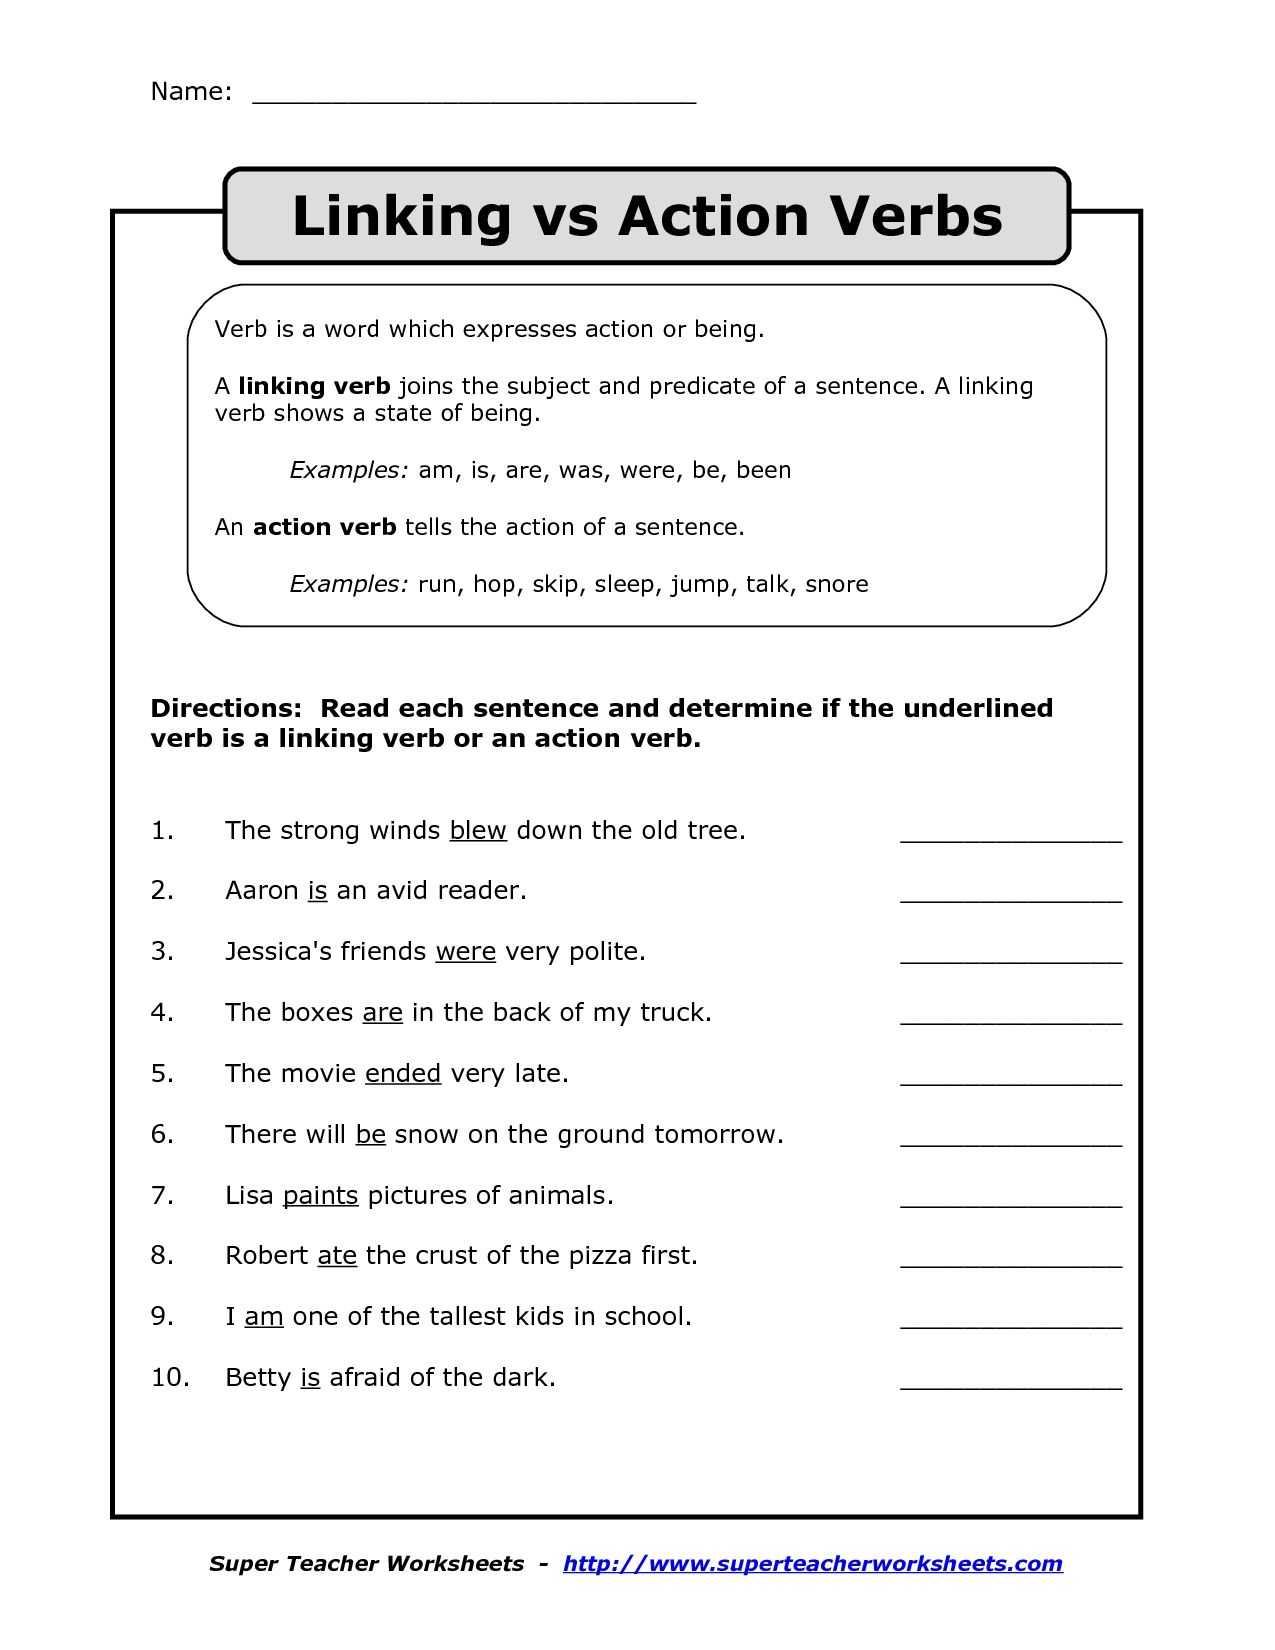 Naming Compounds Worksheet Also Study Action and Linking Verbs Worksheet 5th Grade Danasrhgtop